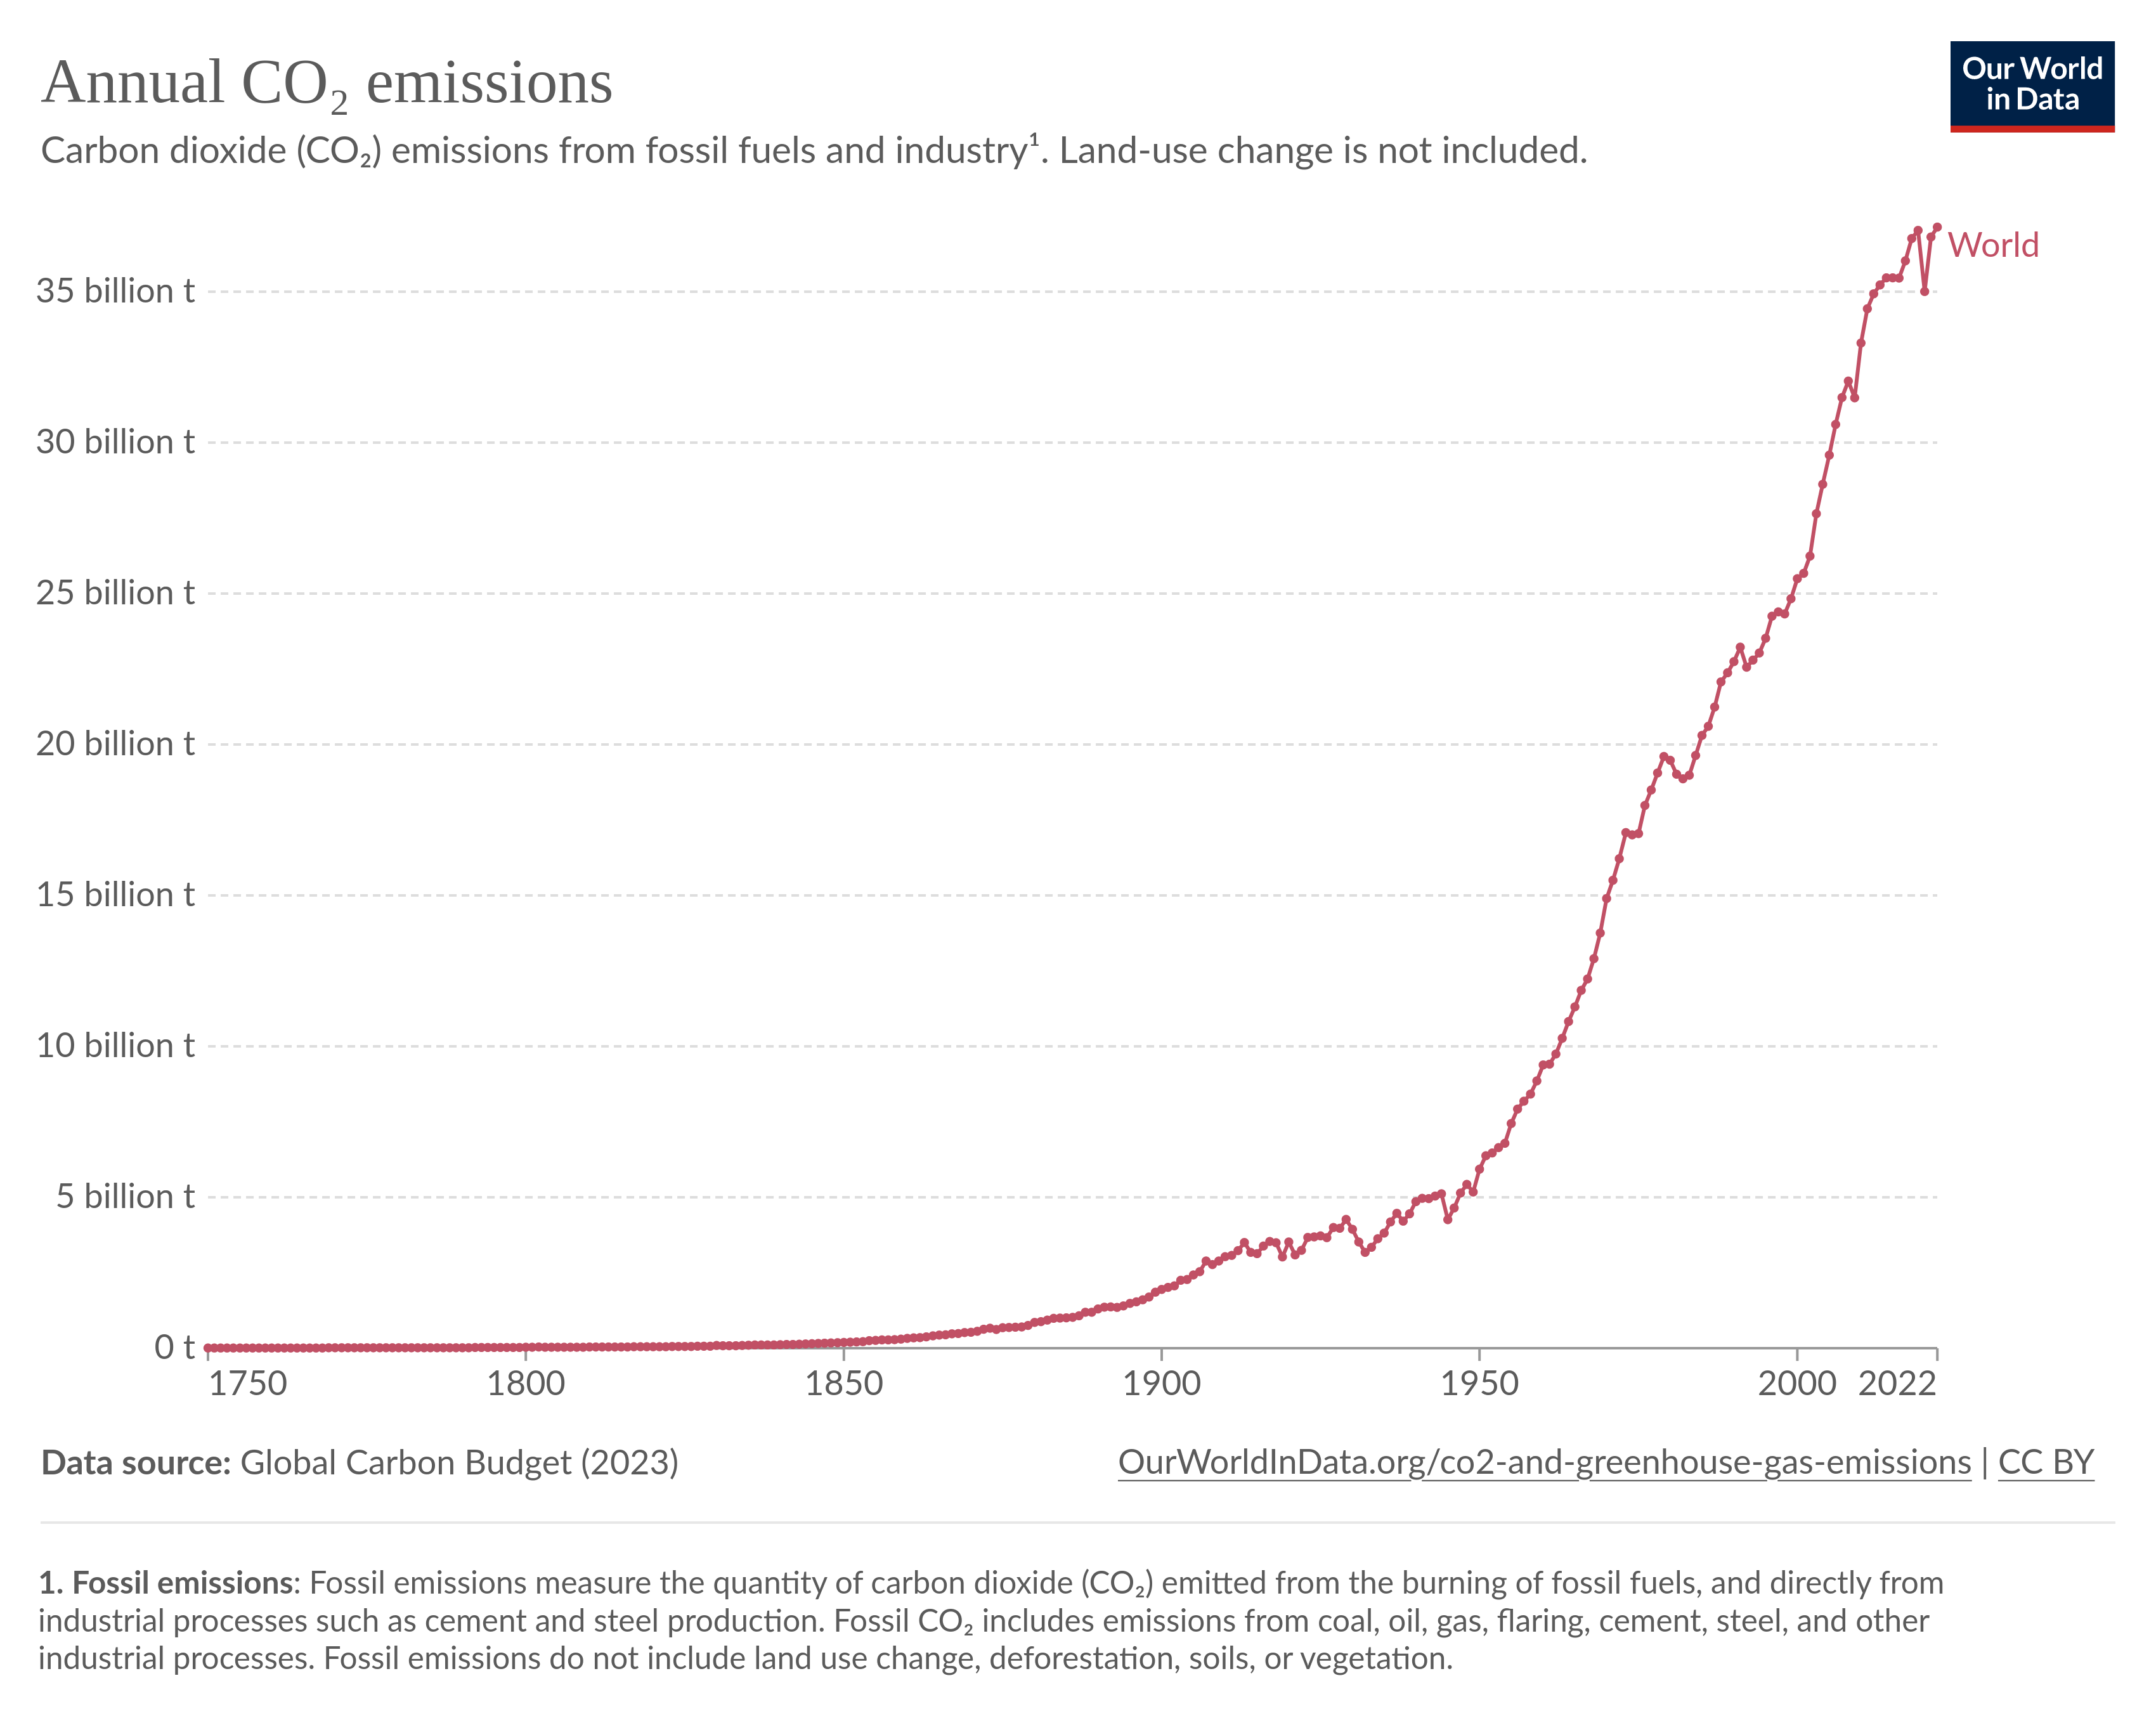 annual co2 emissions per country